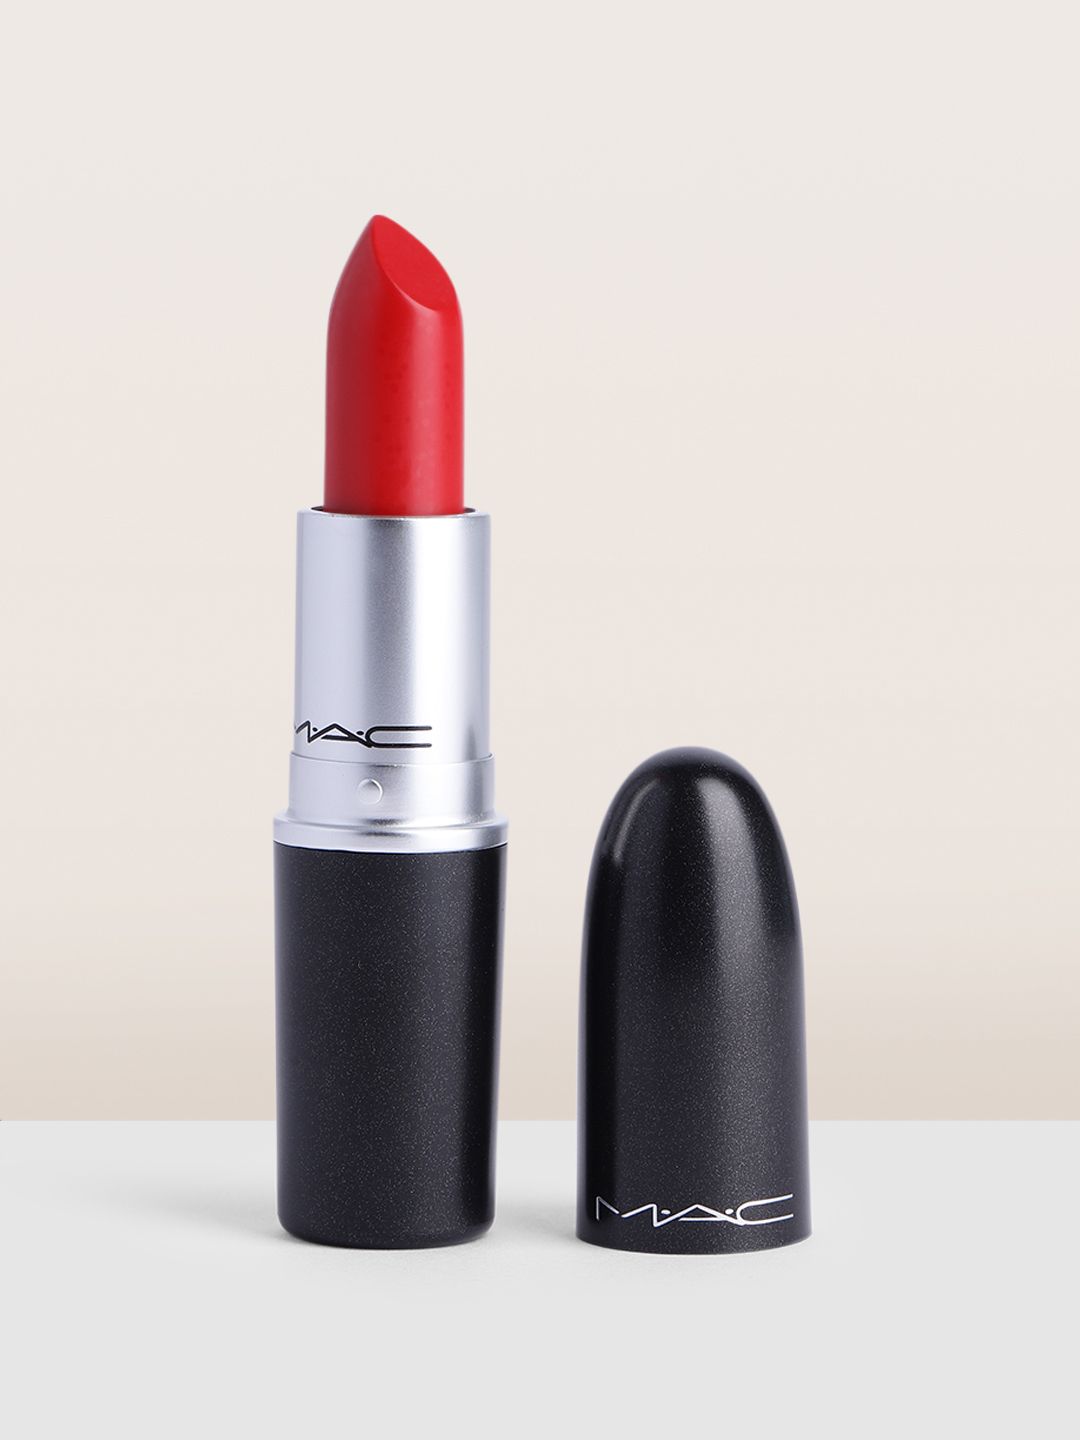 M.A.C Matte Long Lasting Lipstick - Red Rock 640 Price in India